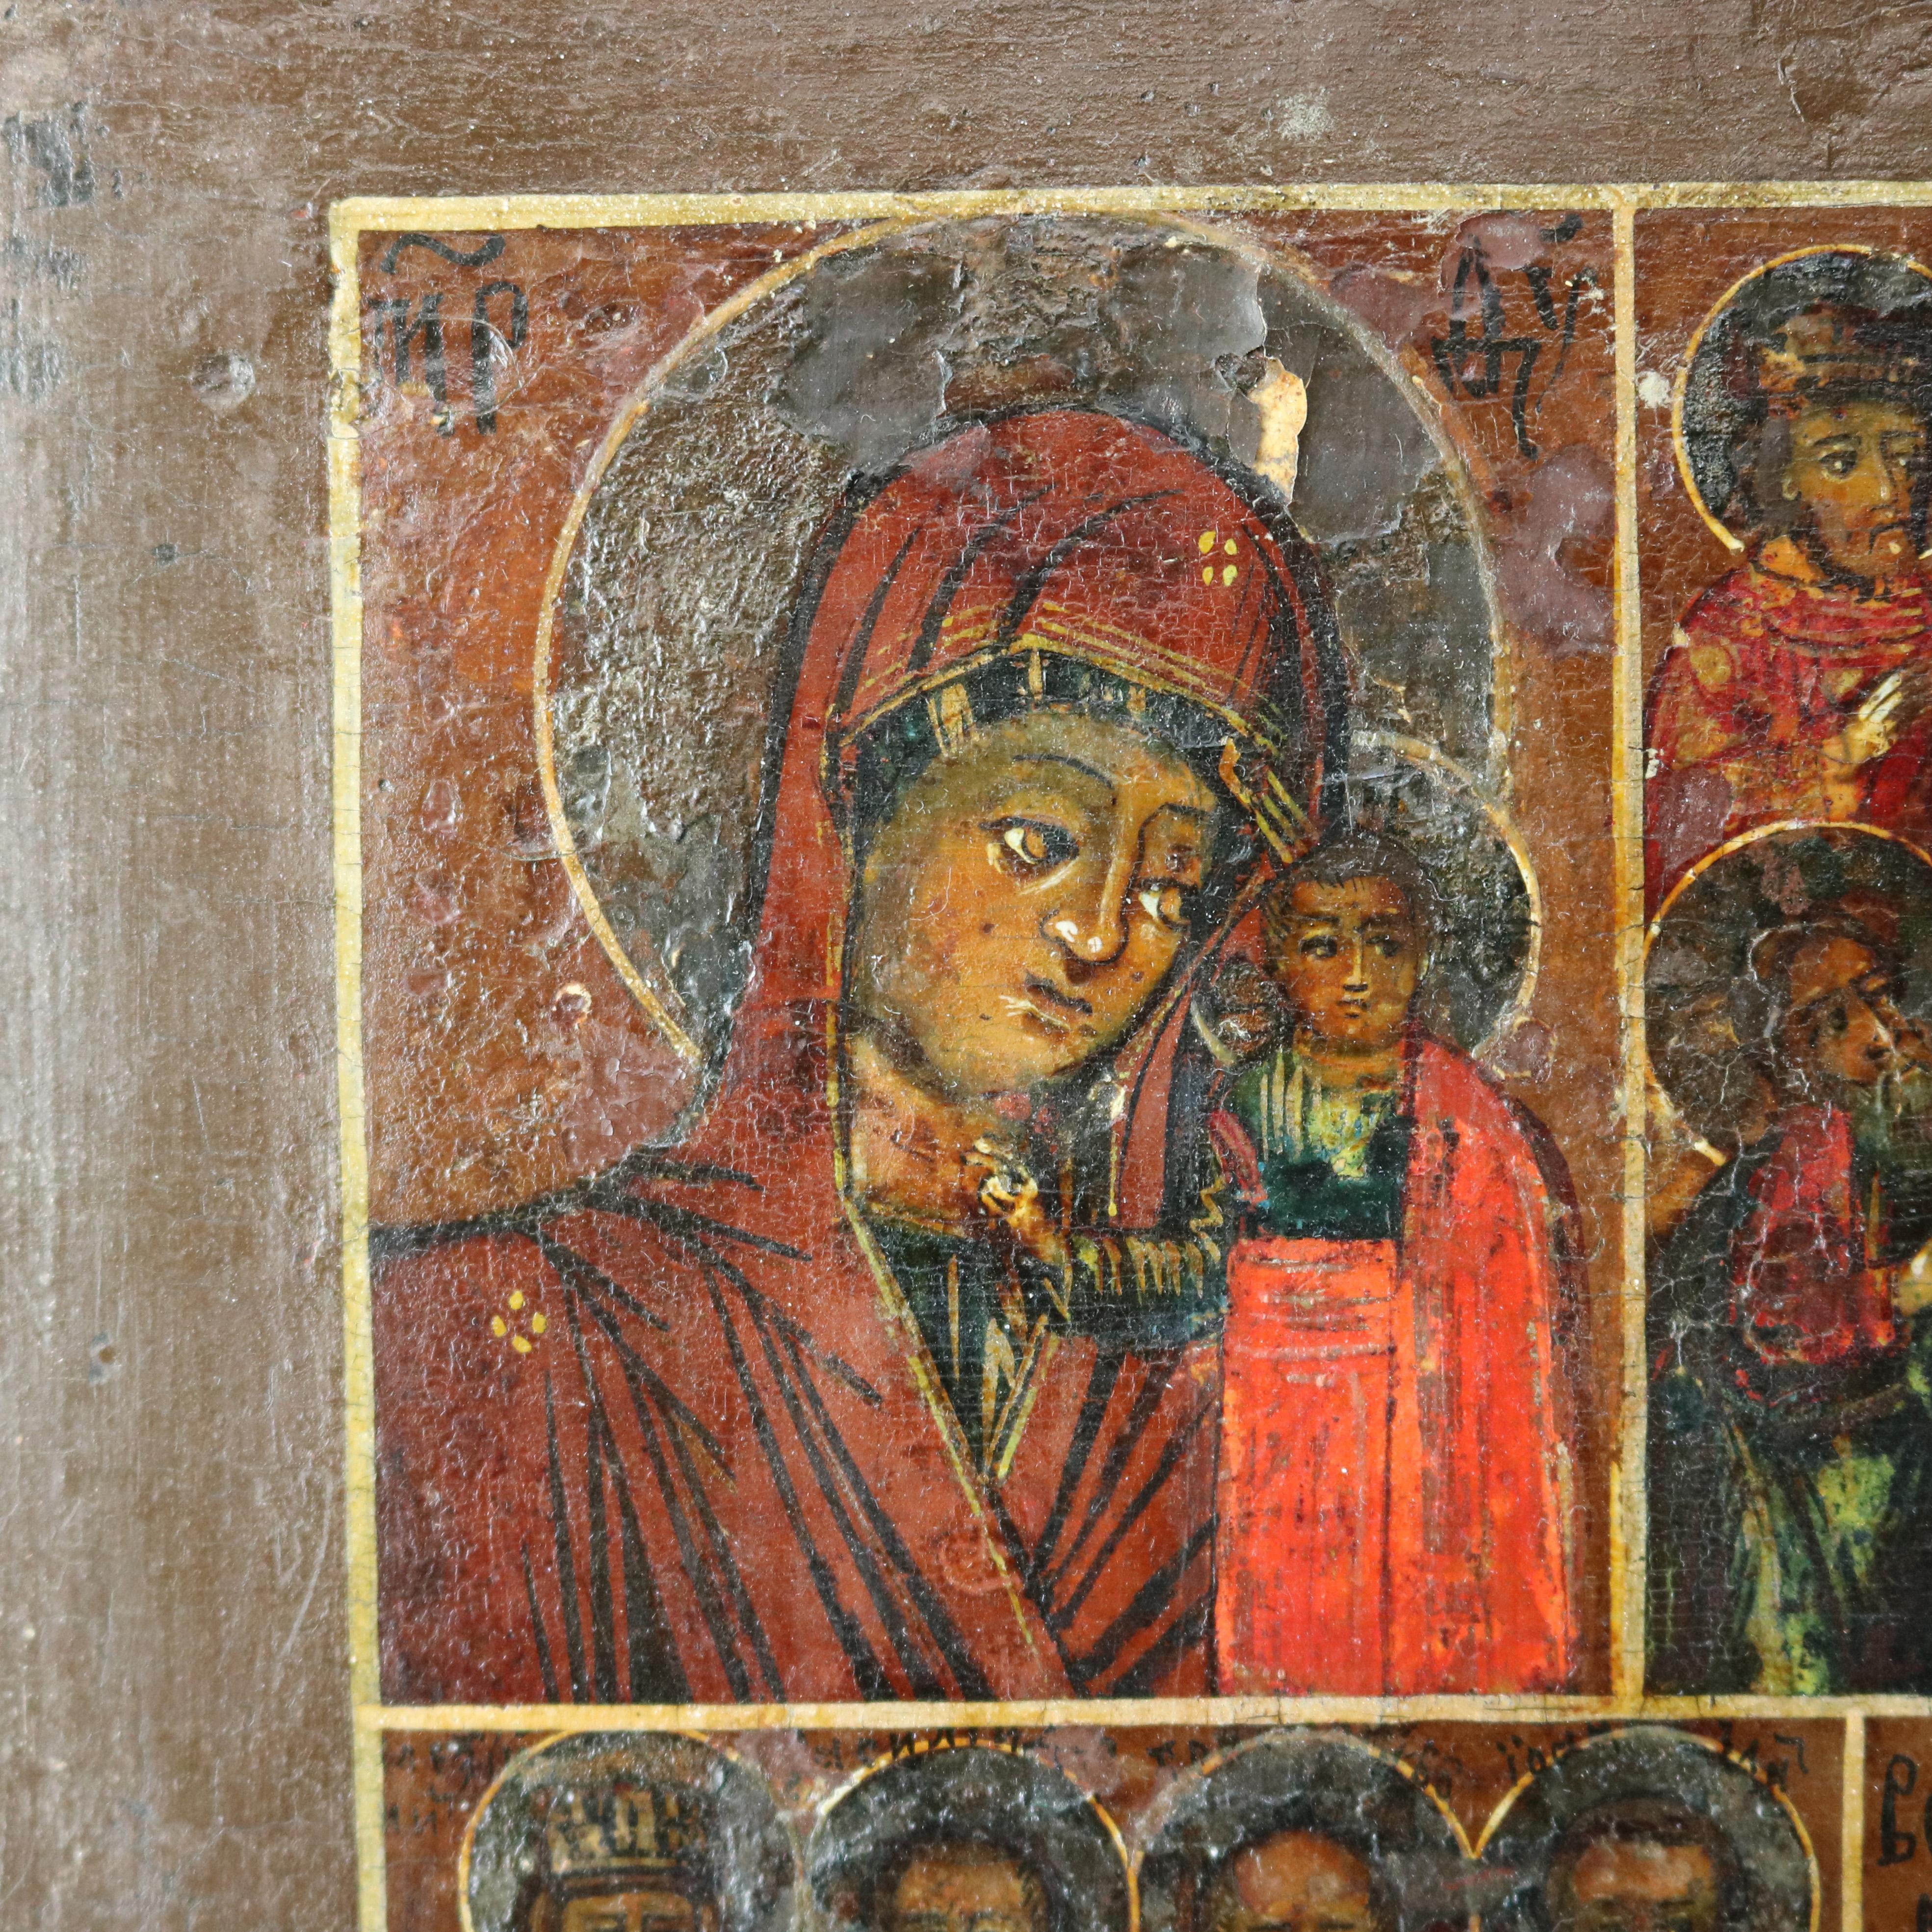 An antique Russian Orthodox Icon offers various Biblical scenes of the life of Jesus Christ painted on board, 18th-19th century.

Measures: 12.25